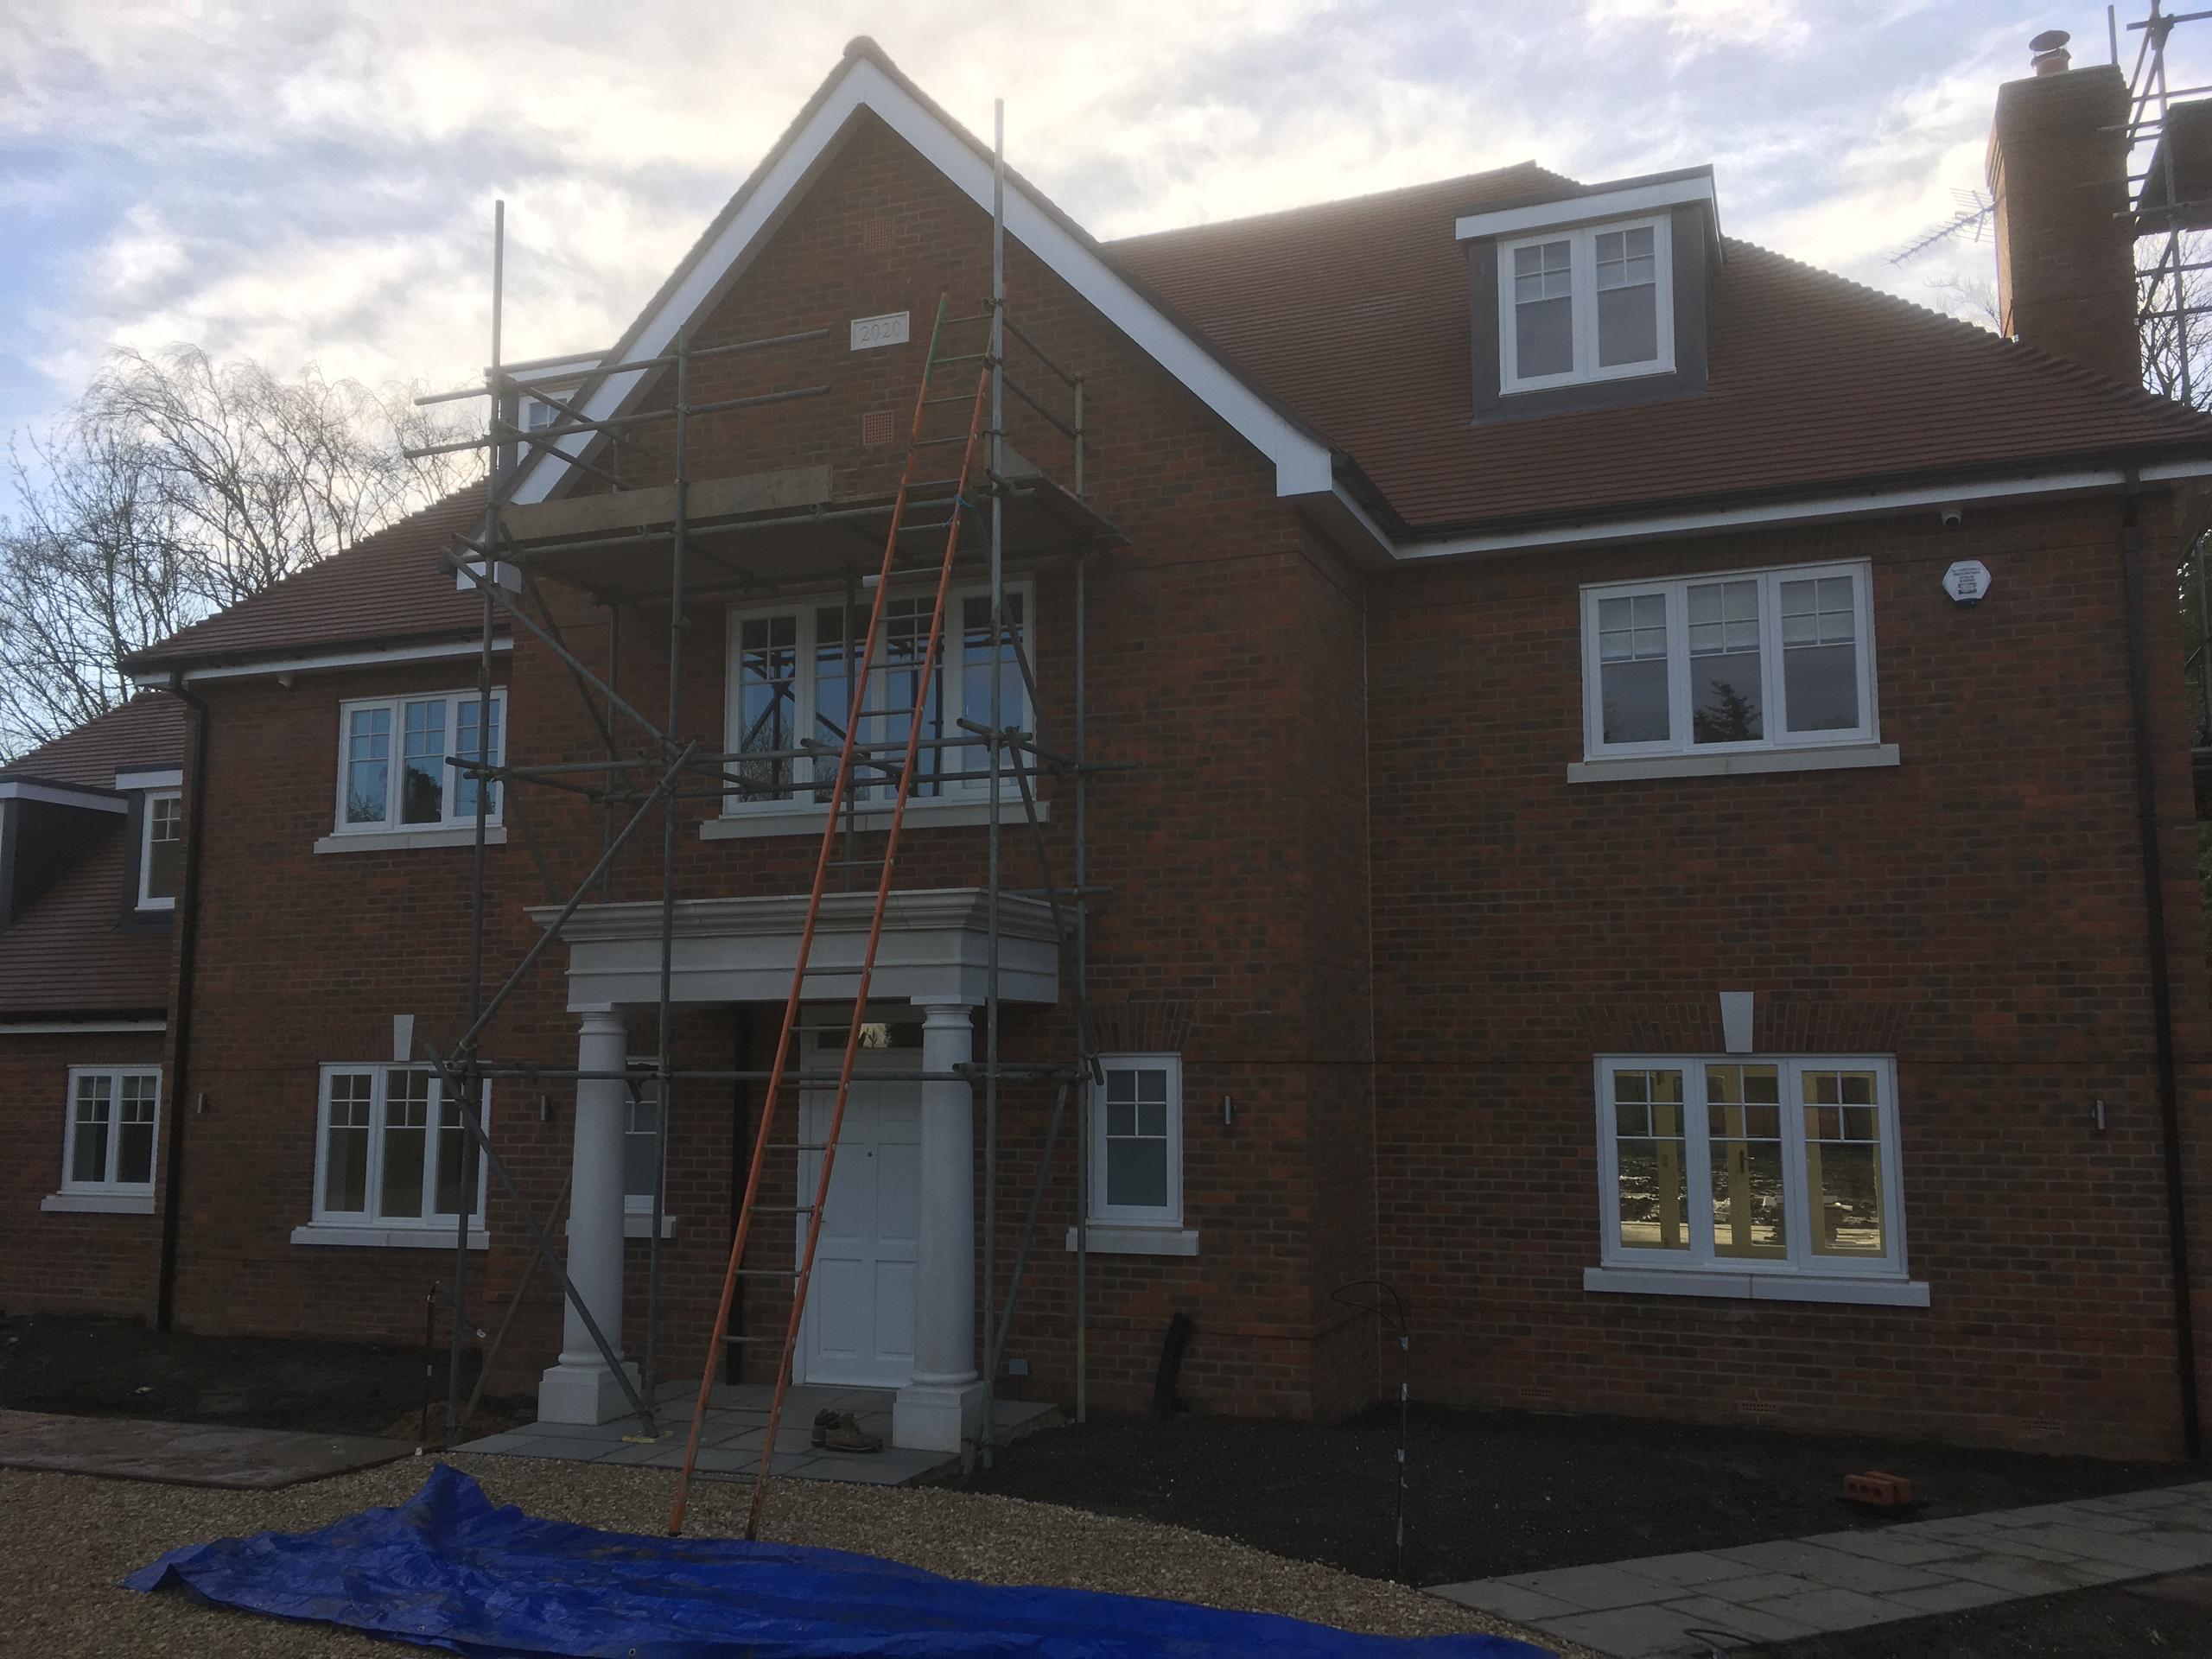 New build development in Berkshire with timber windows